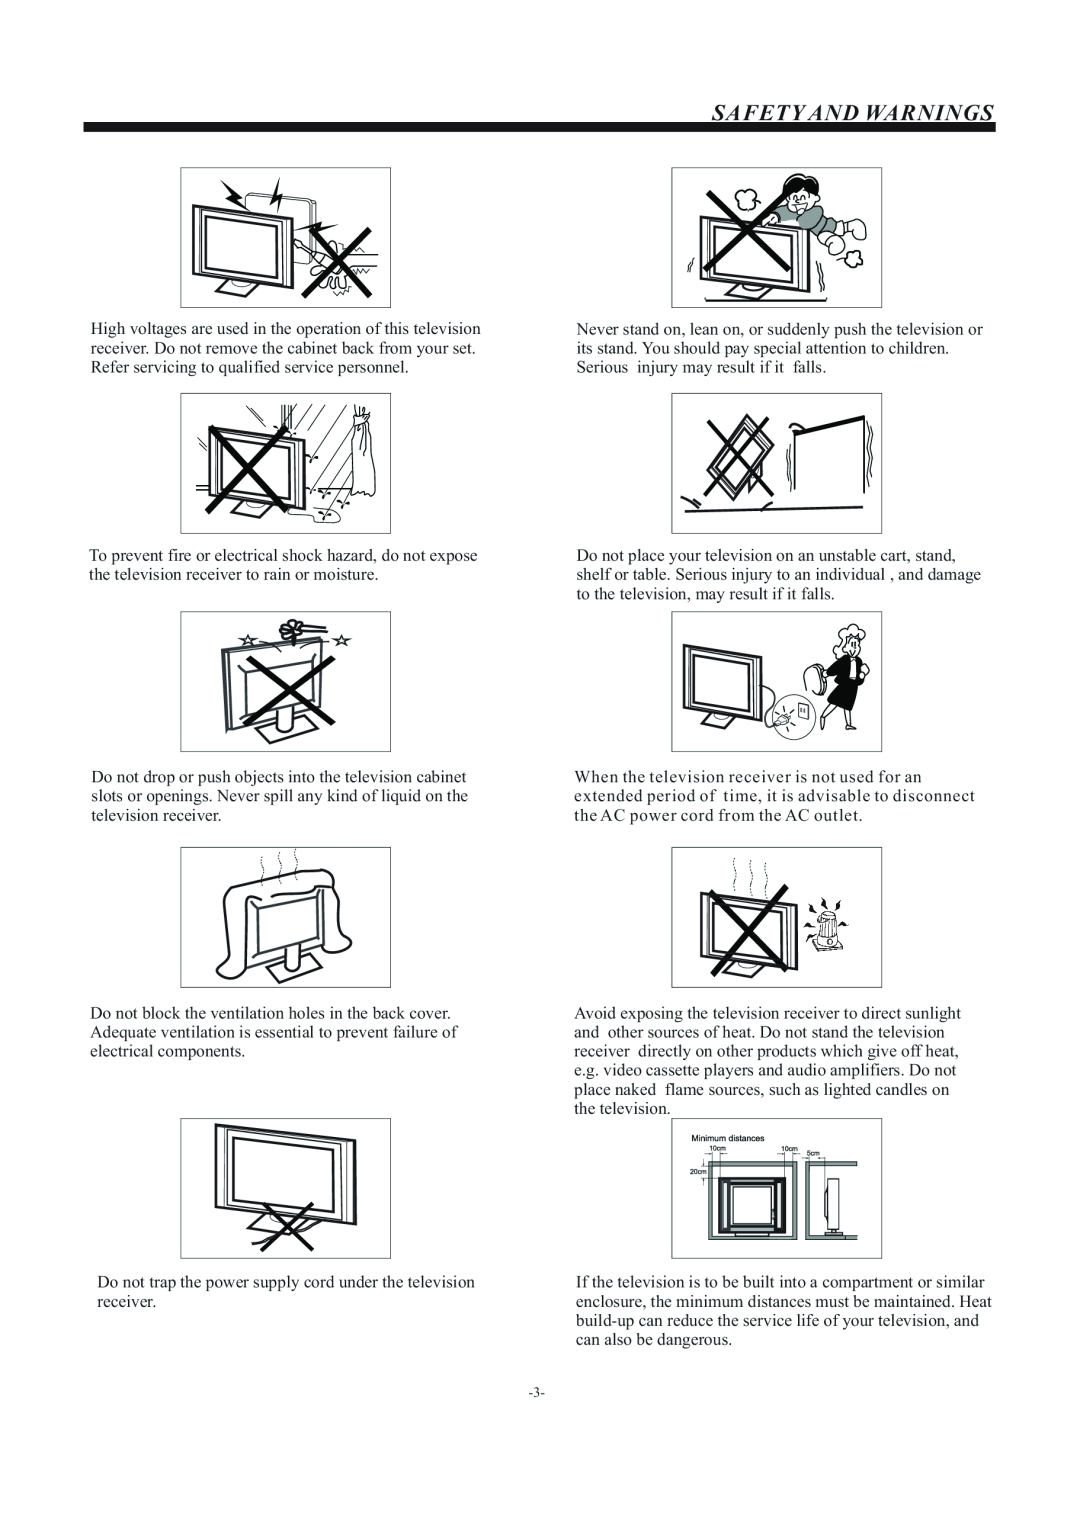 Haier LE24T1000F, LE22T1000F Safety And Warnings, Do not trap the power supply cord under the television receiver 